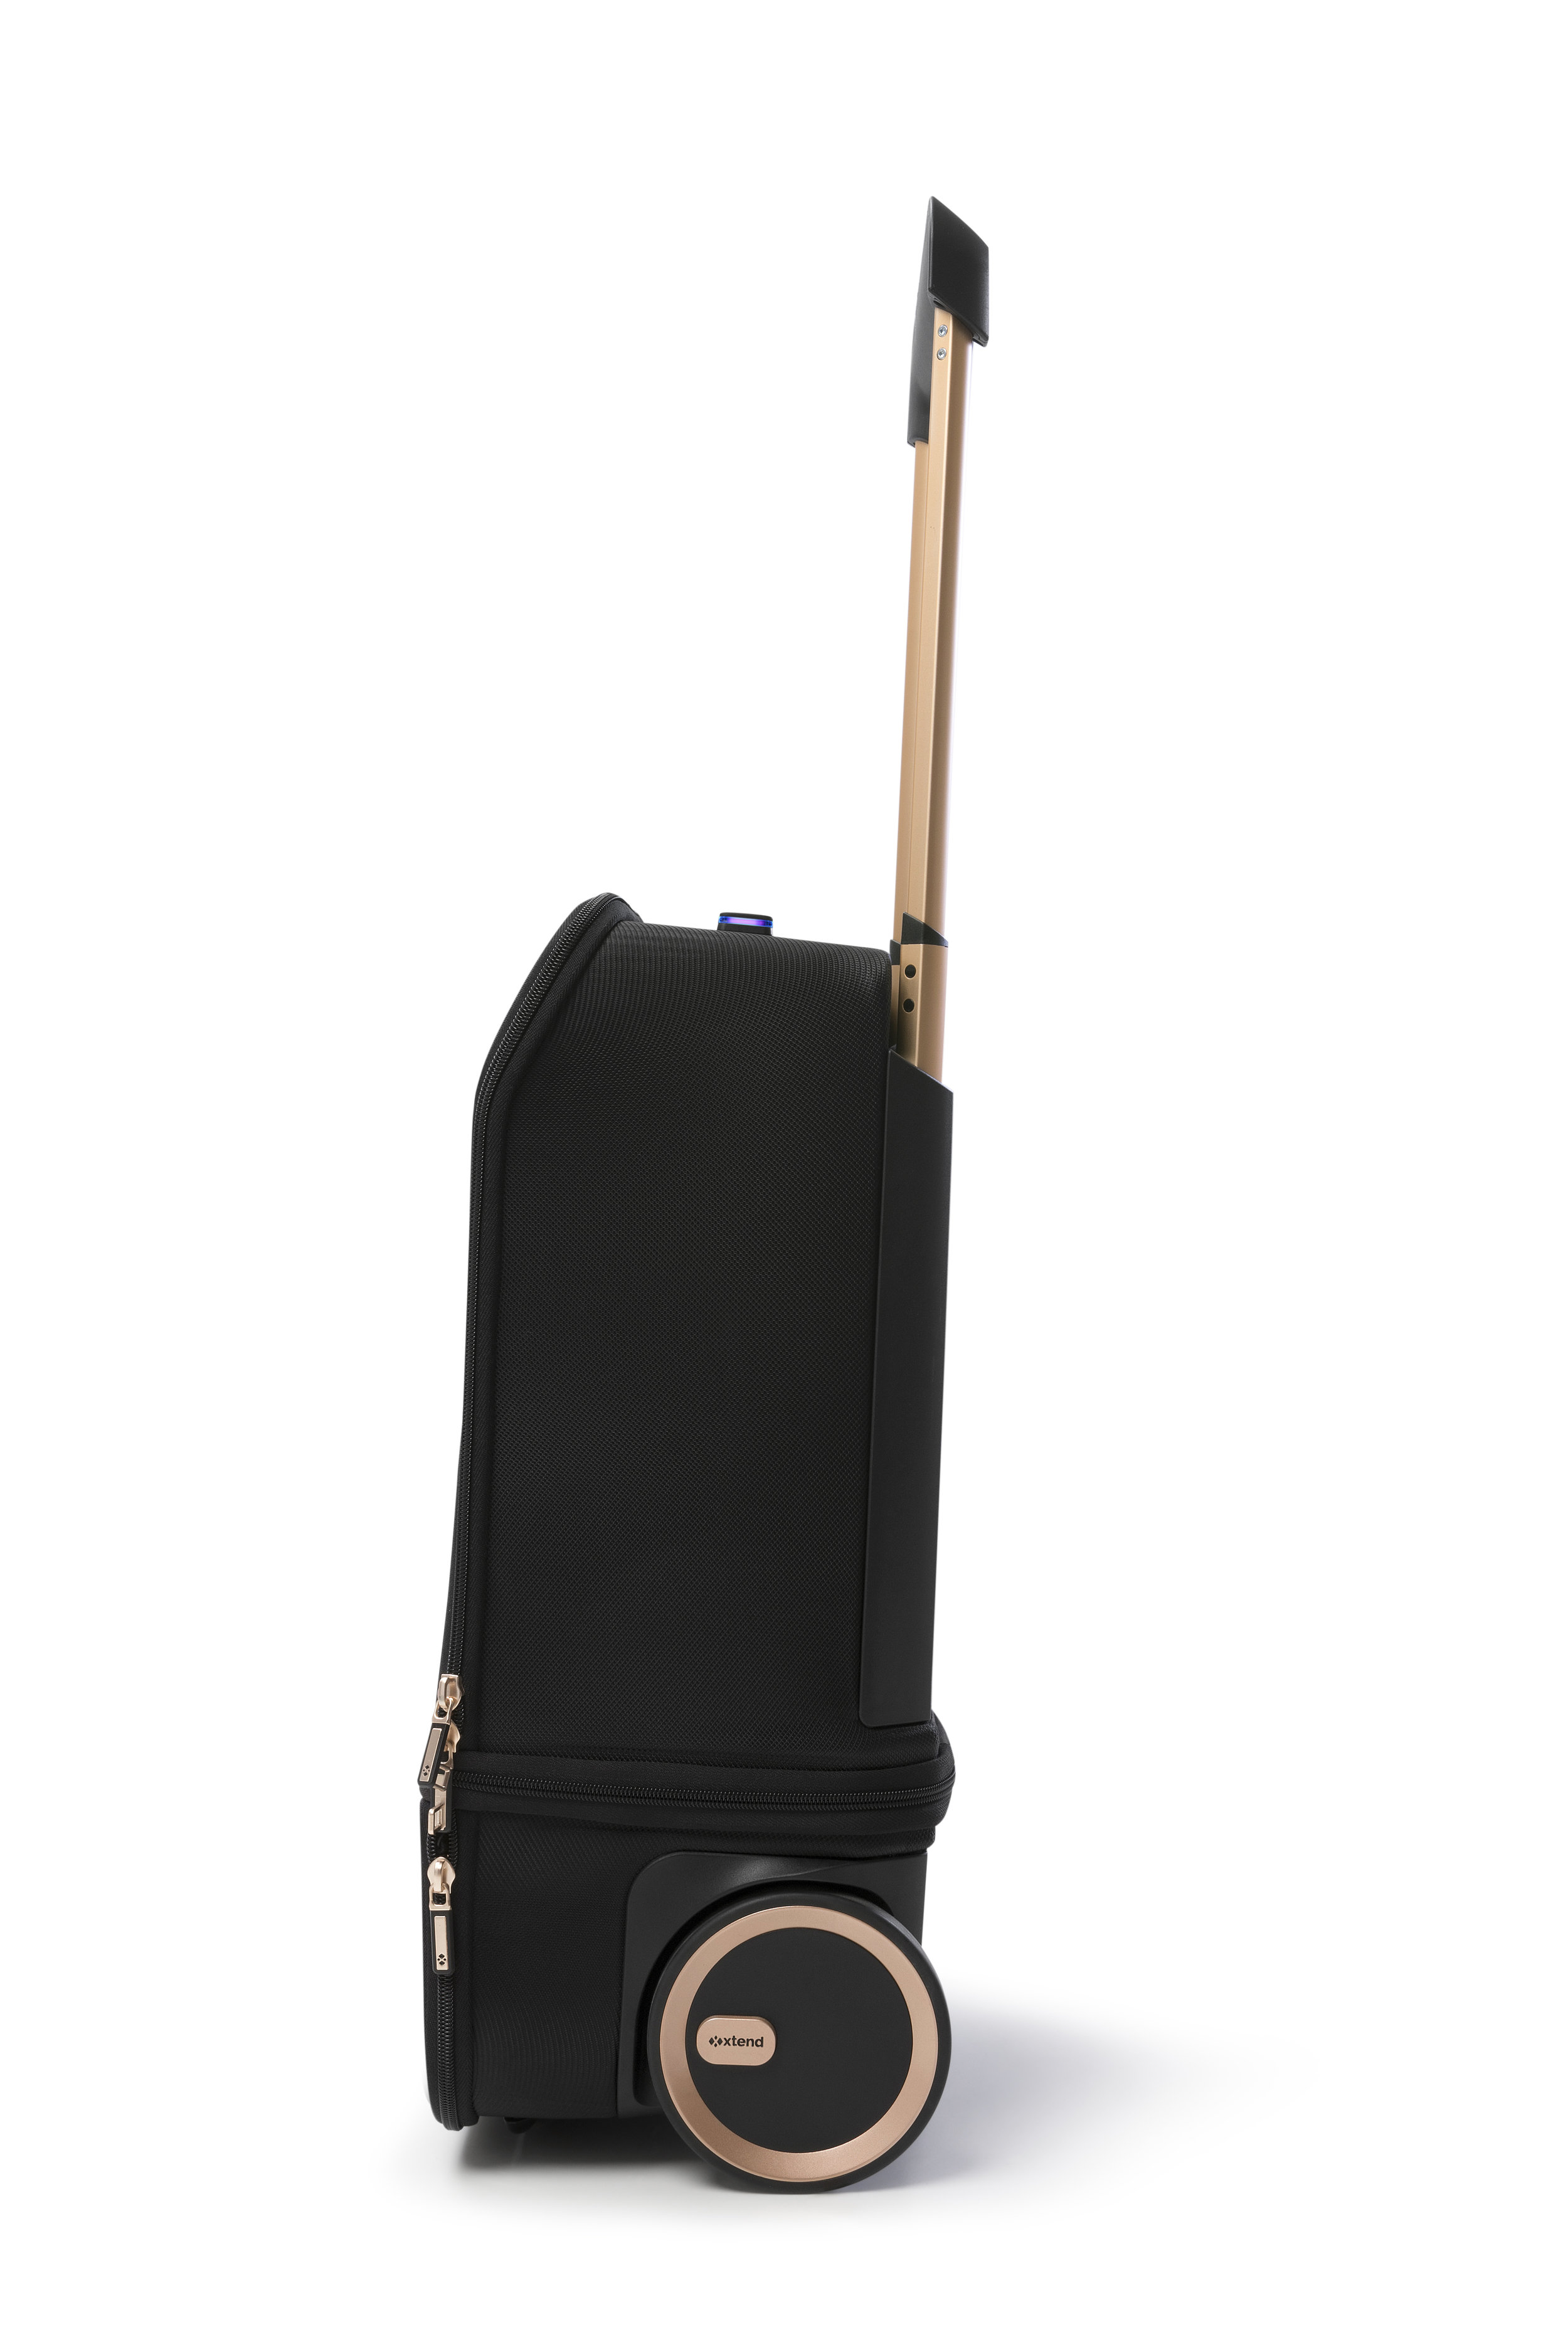 best luggage Xtend smart travel carry-on luggage usb charging compression tsa approved (Copy)